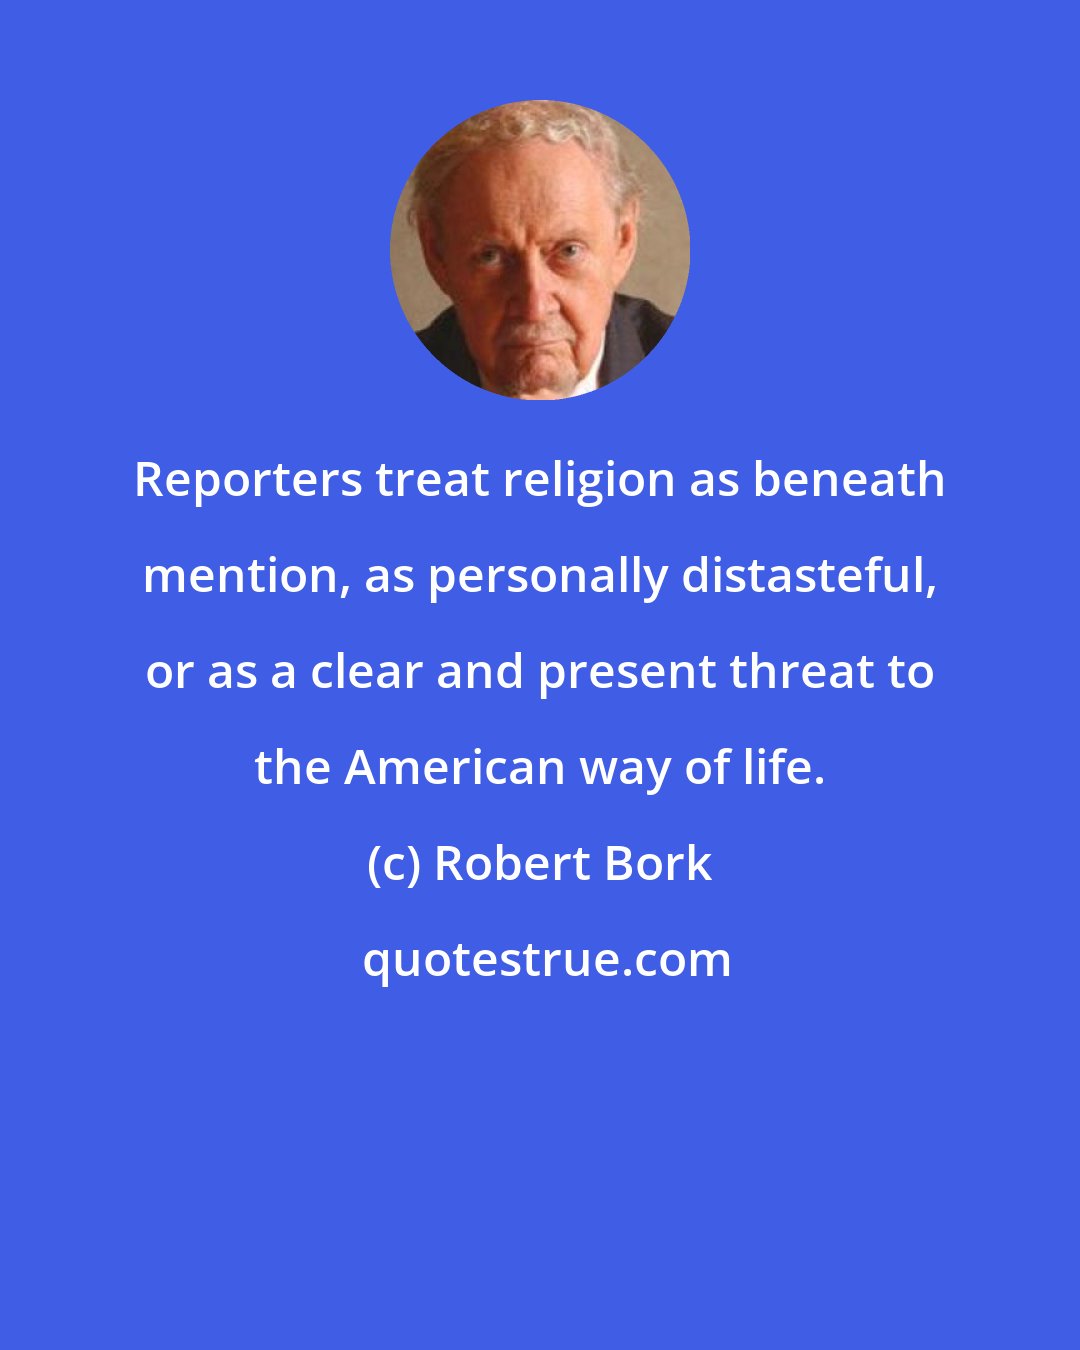 Robert Bork: Reporters treat religion as beneath mention, as personally distasteful, or as a clear and present threat to the American way of life.